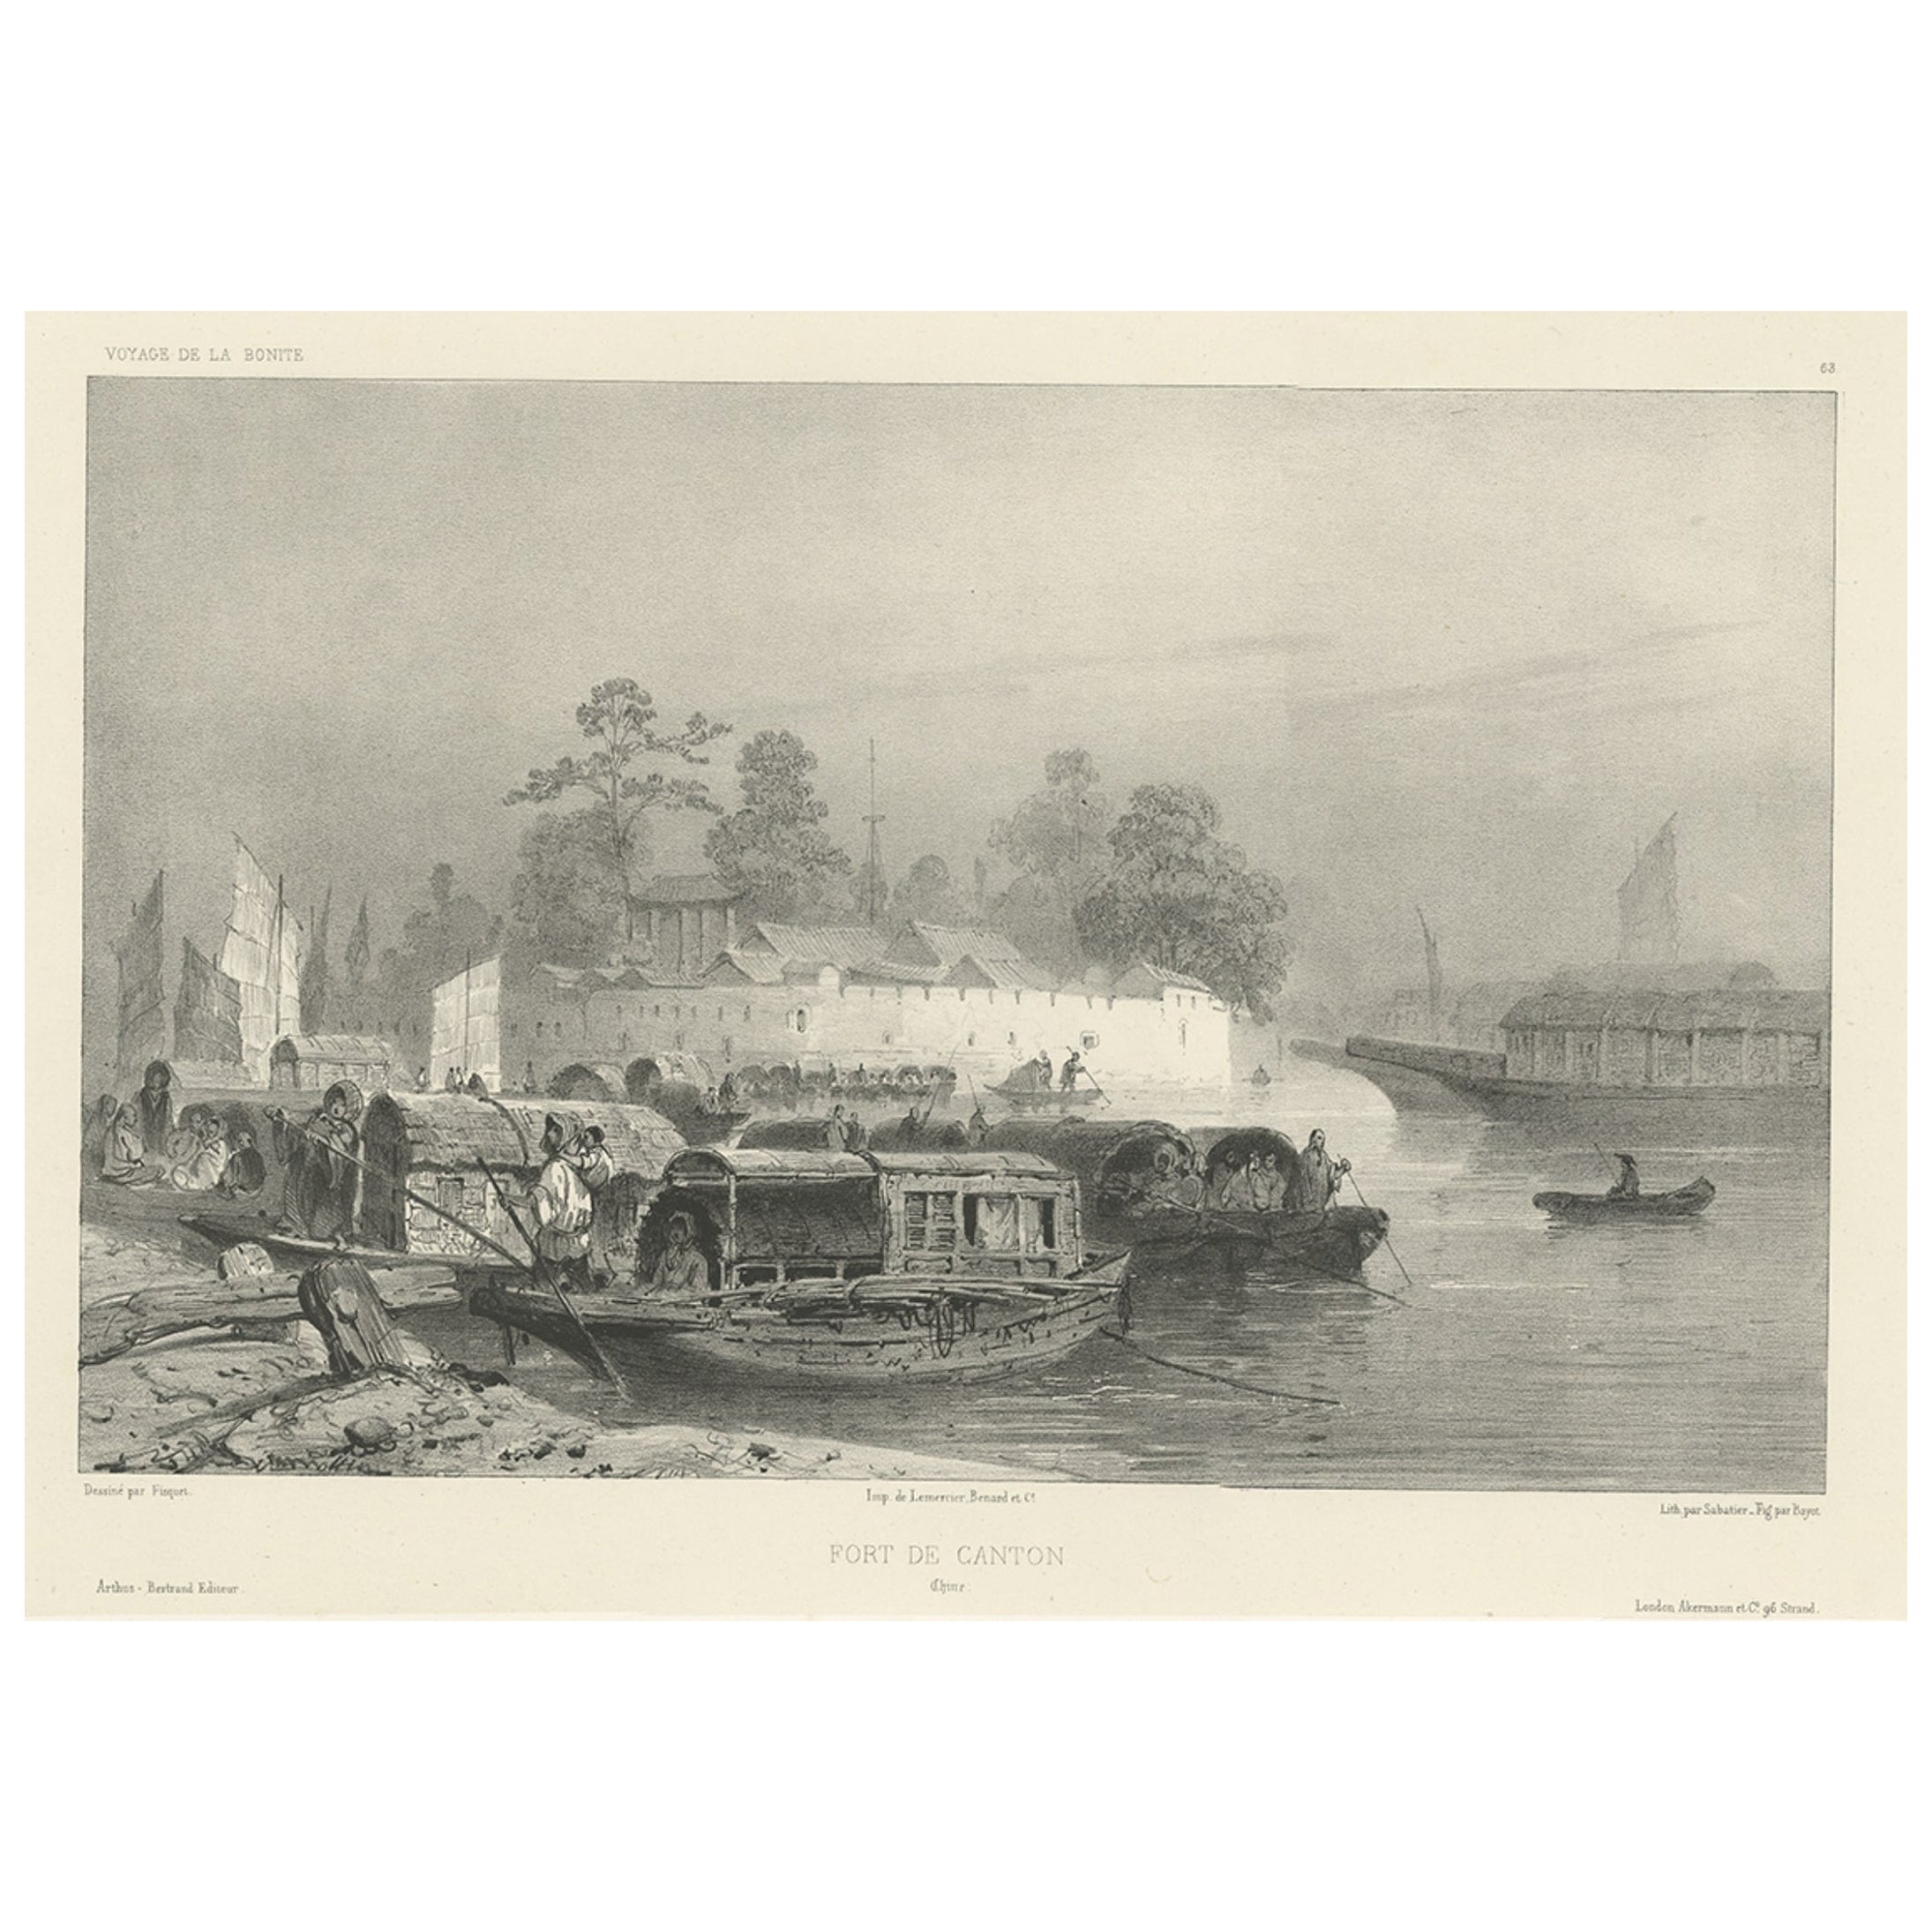 Antique Print of a Fortress in Guangzhou in China, c.1850